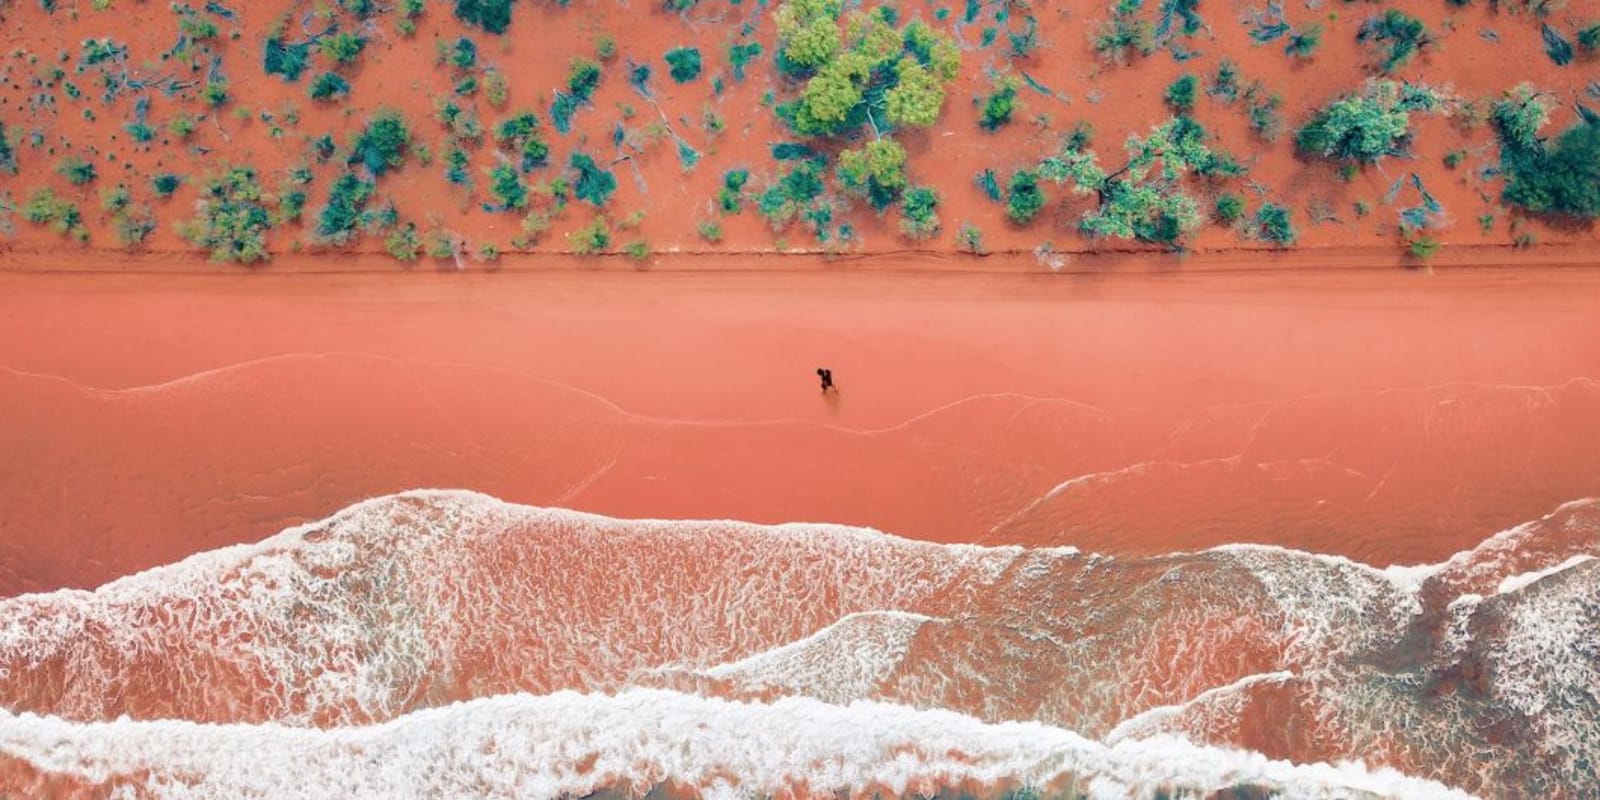 Aerial view of a person walking along a beach with red sand